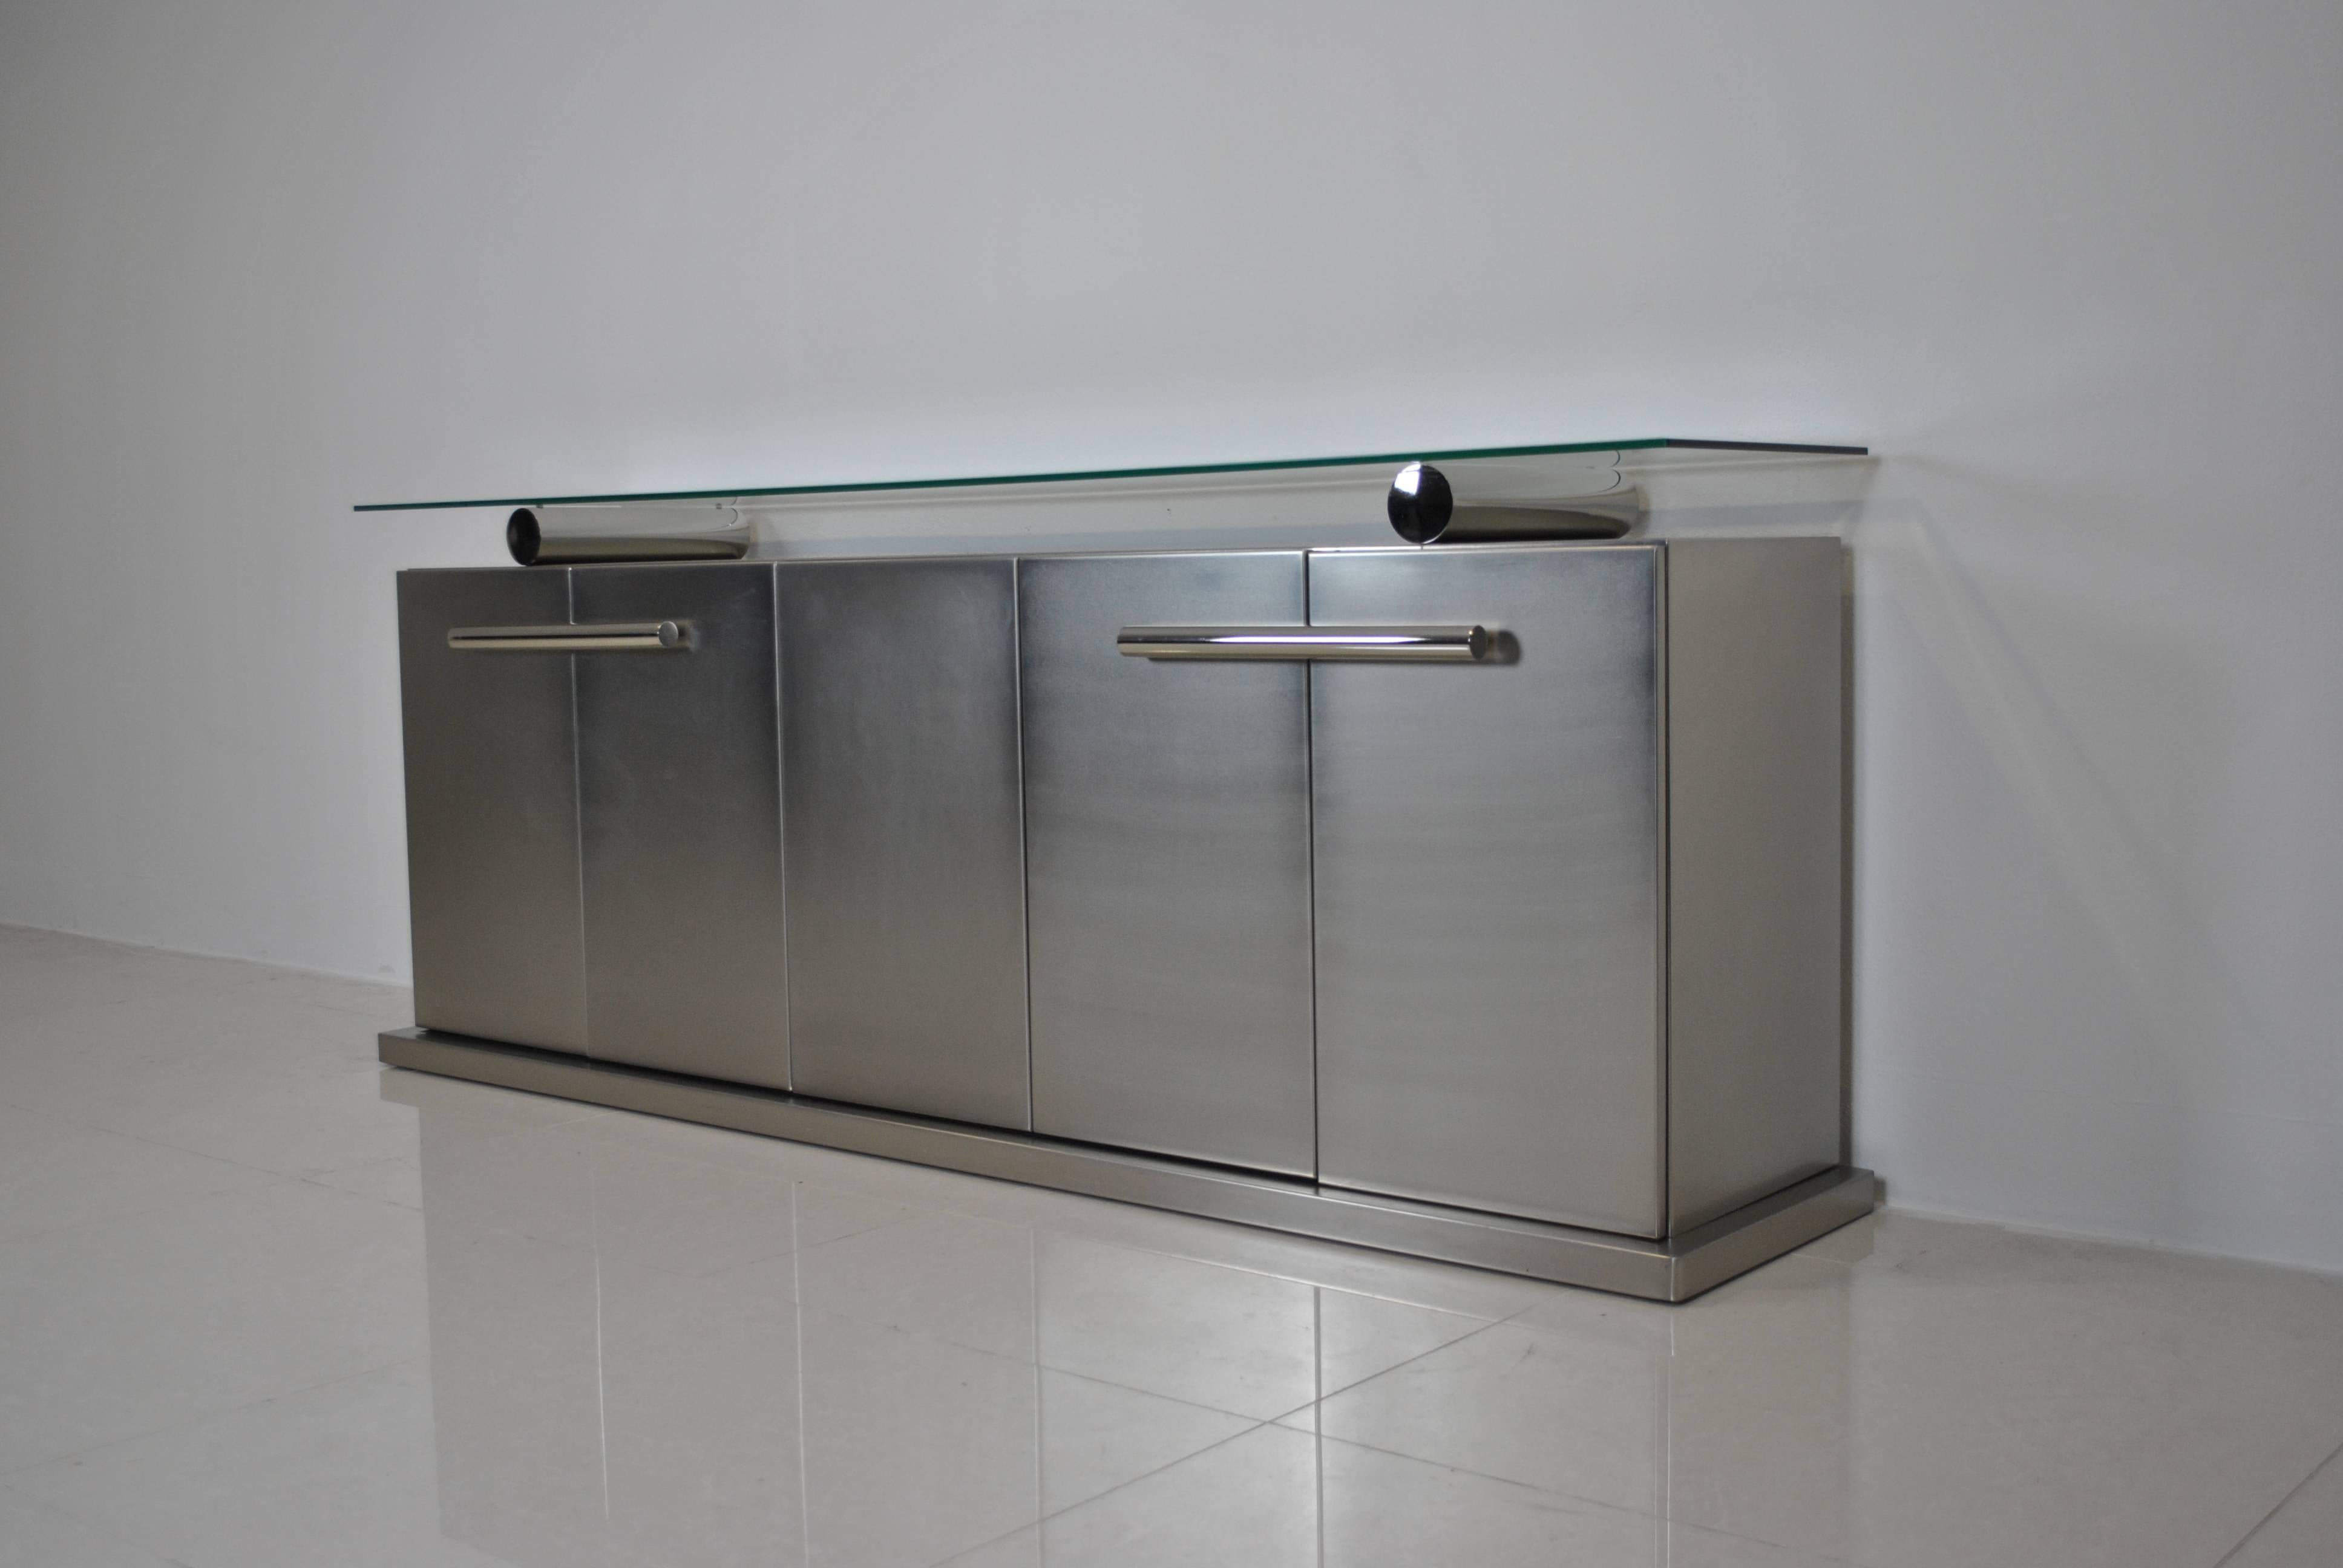 Late 20th Century Spectacular Stainless Steel Sideboard by Koenraad Dewulf for BelgoChrom For Sale